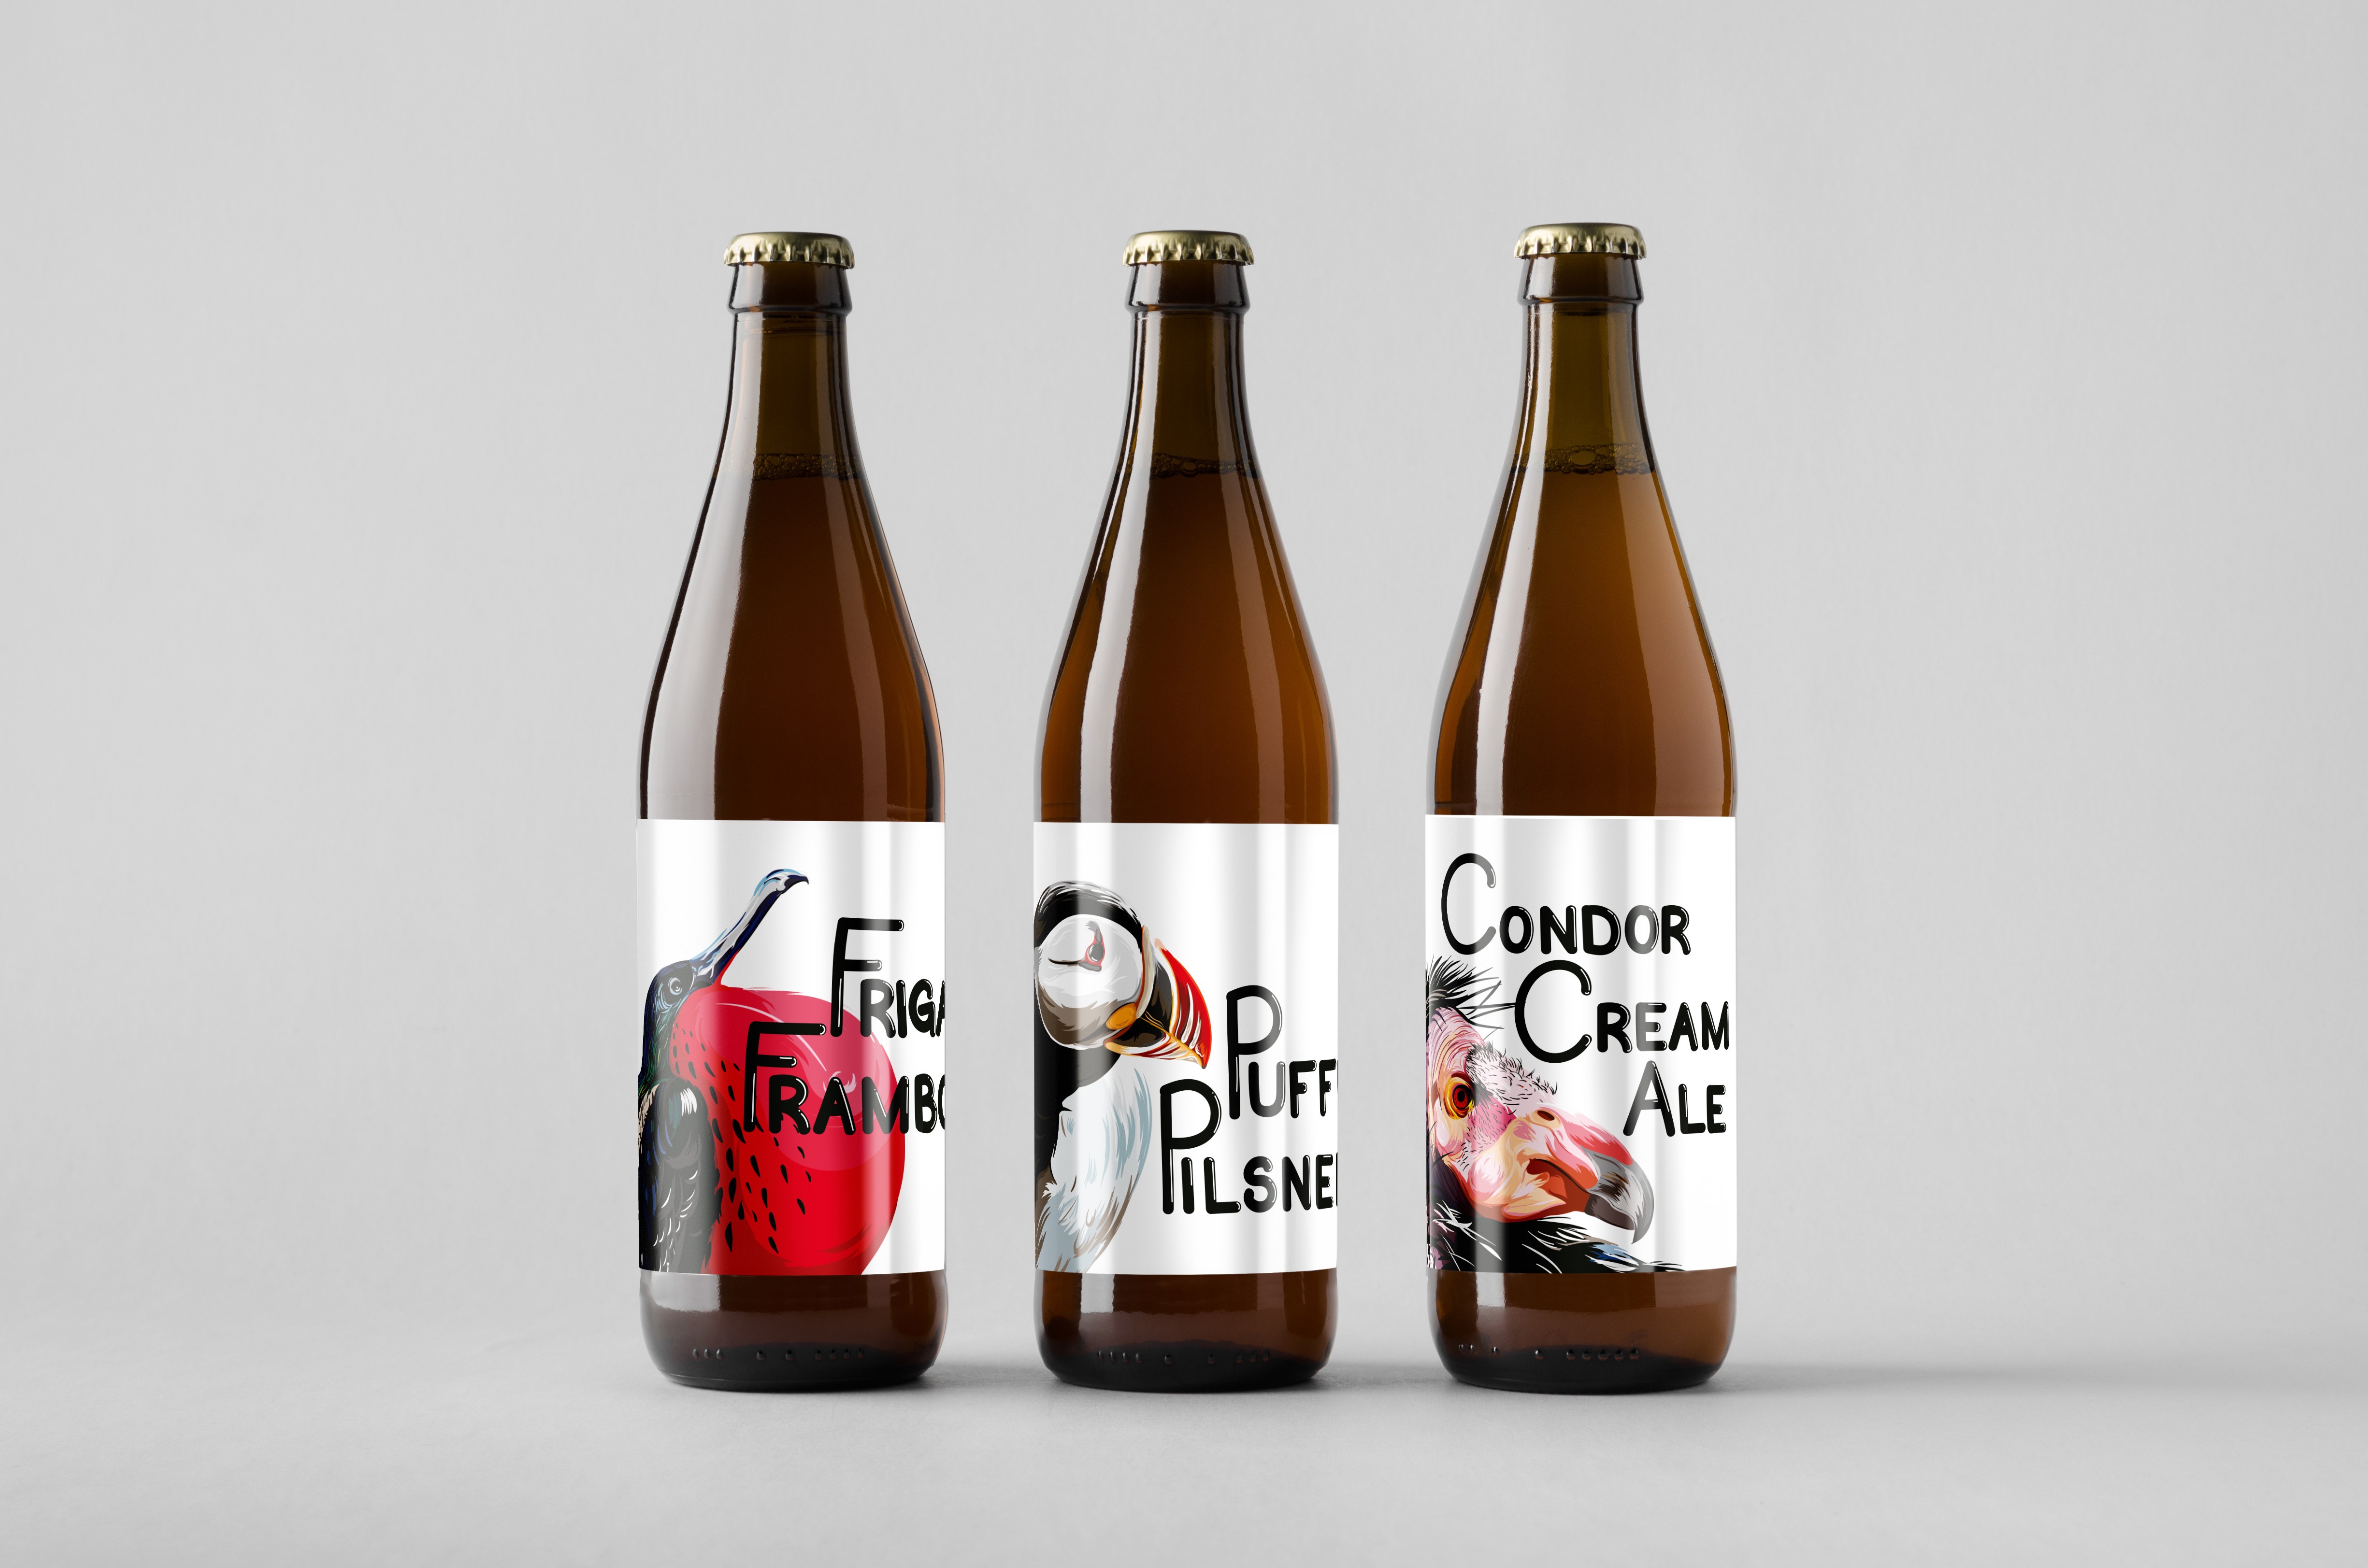 Altro Labels uses vibrant inks to print labels that help win shelf wars